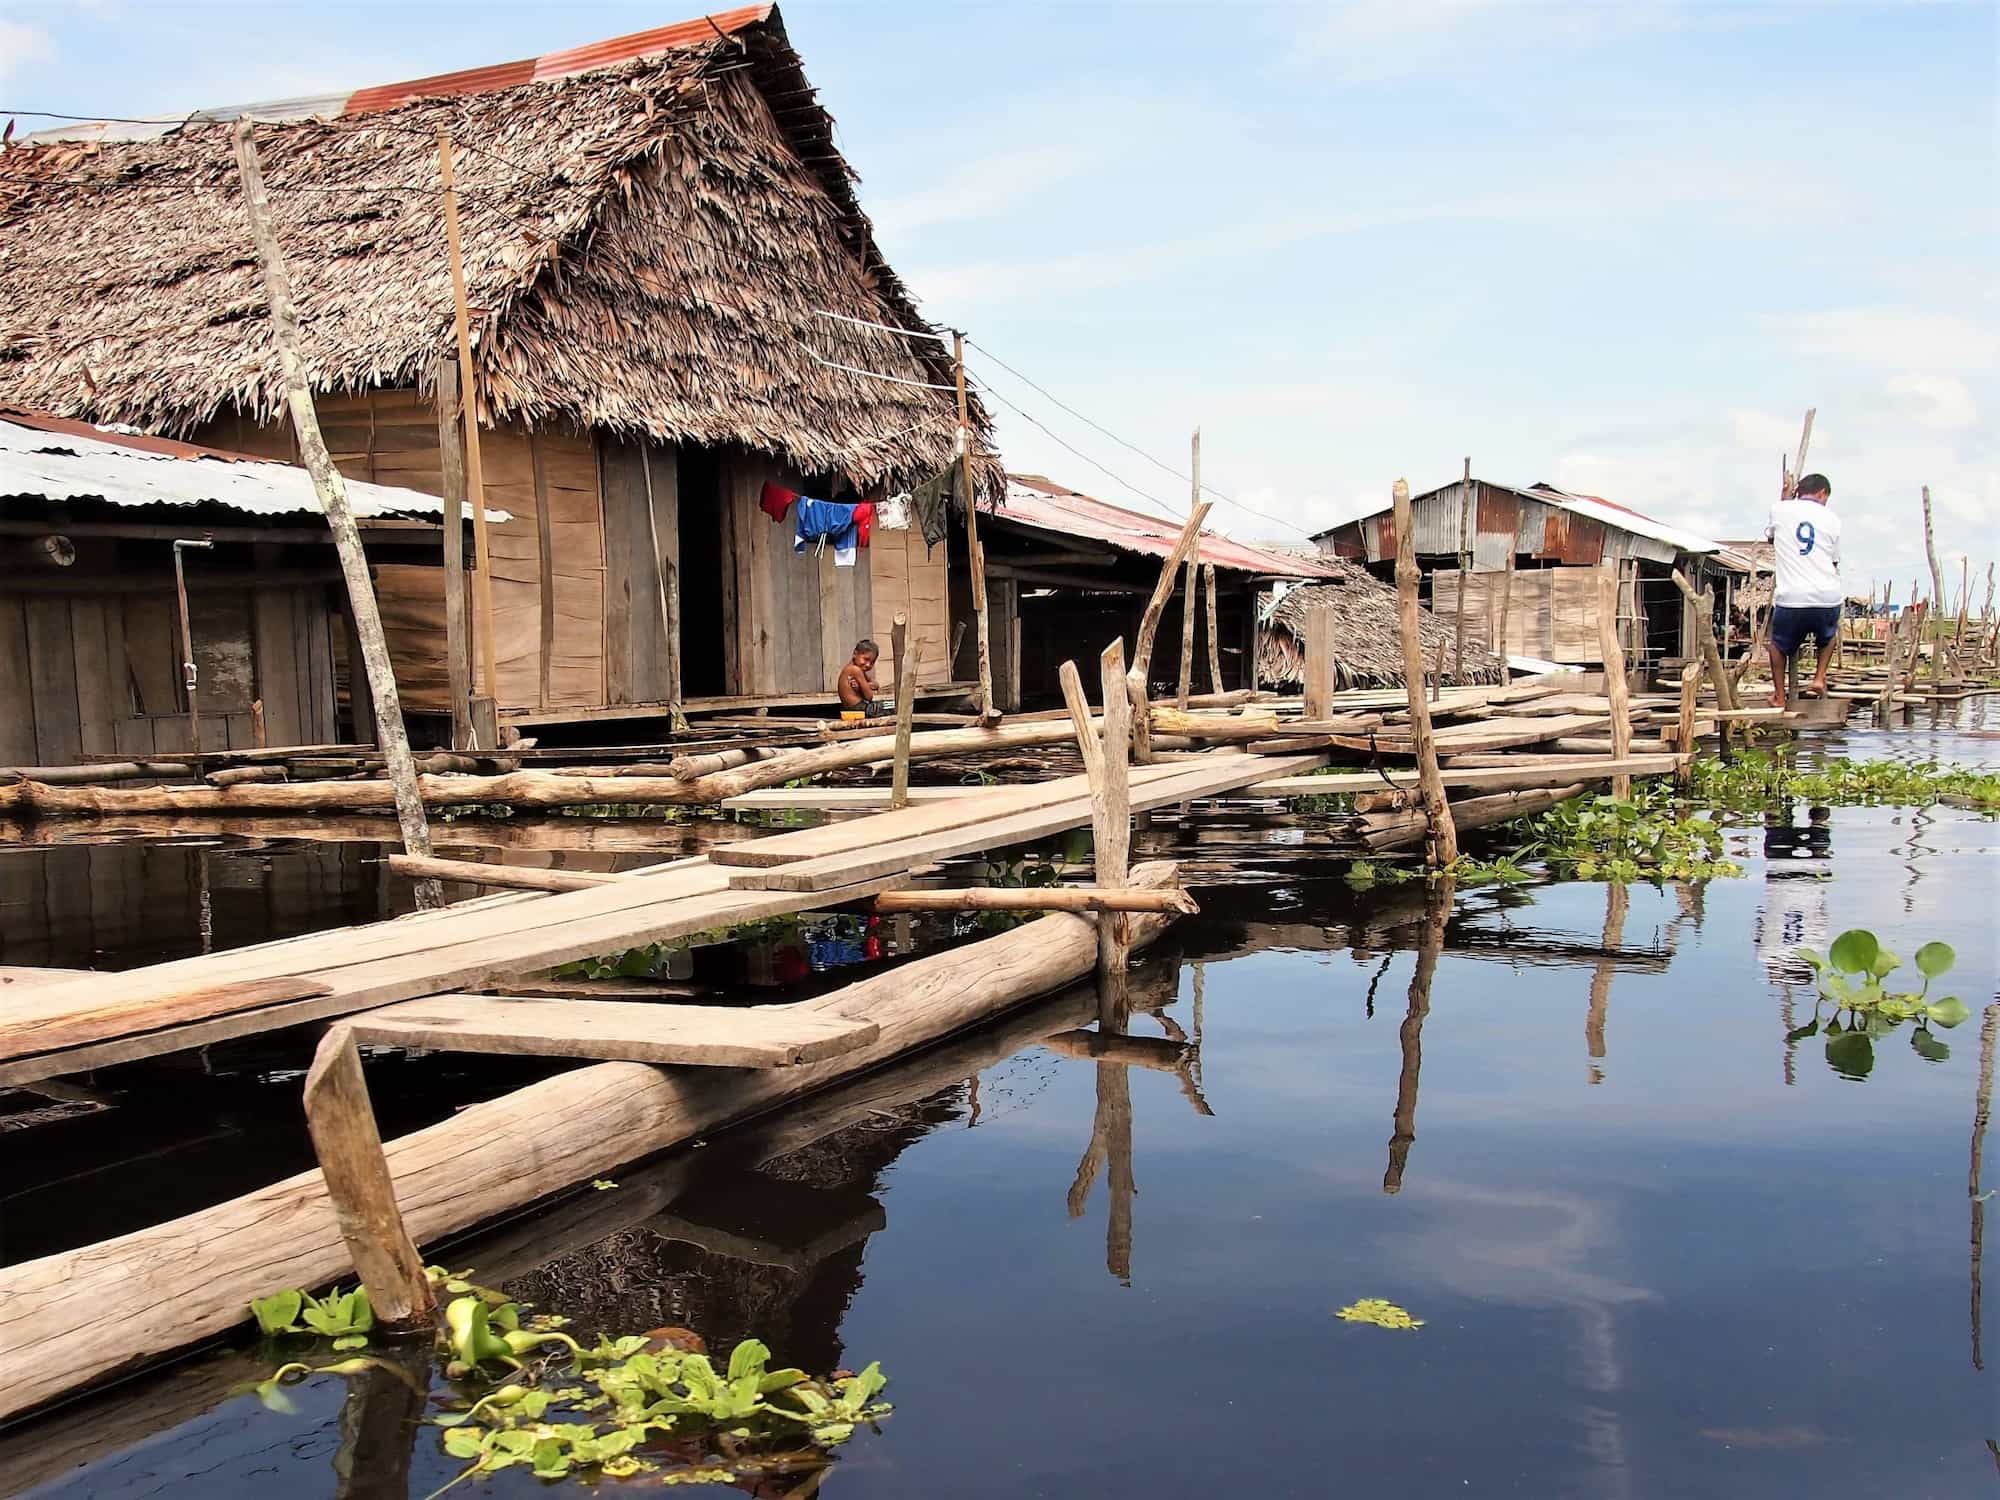 Houses on stilts along the Amazon river